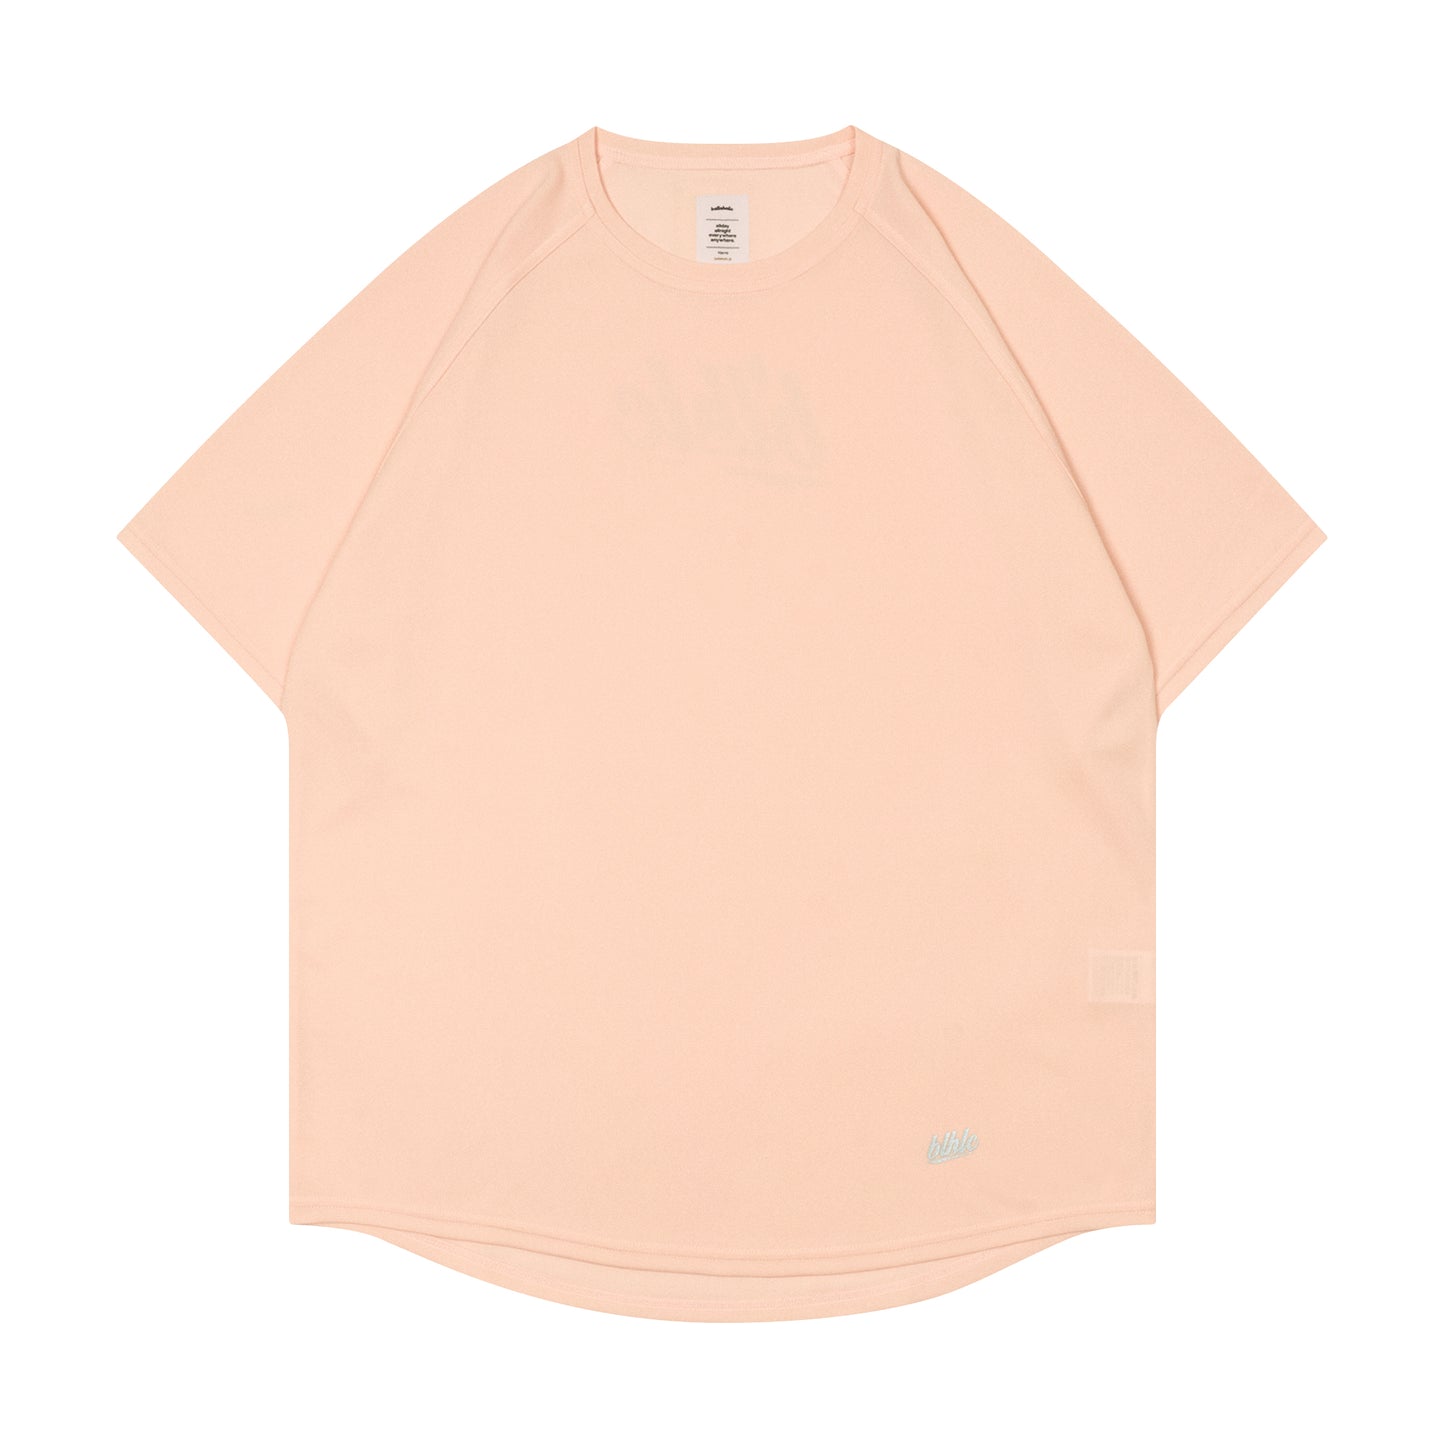 blhlc Back Print Cool Tee (peach/reflector)